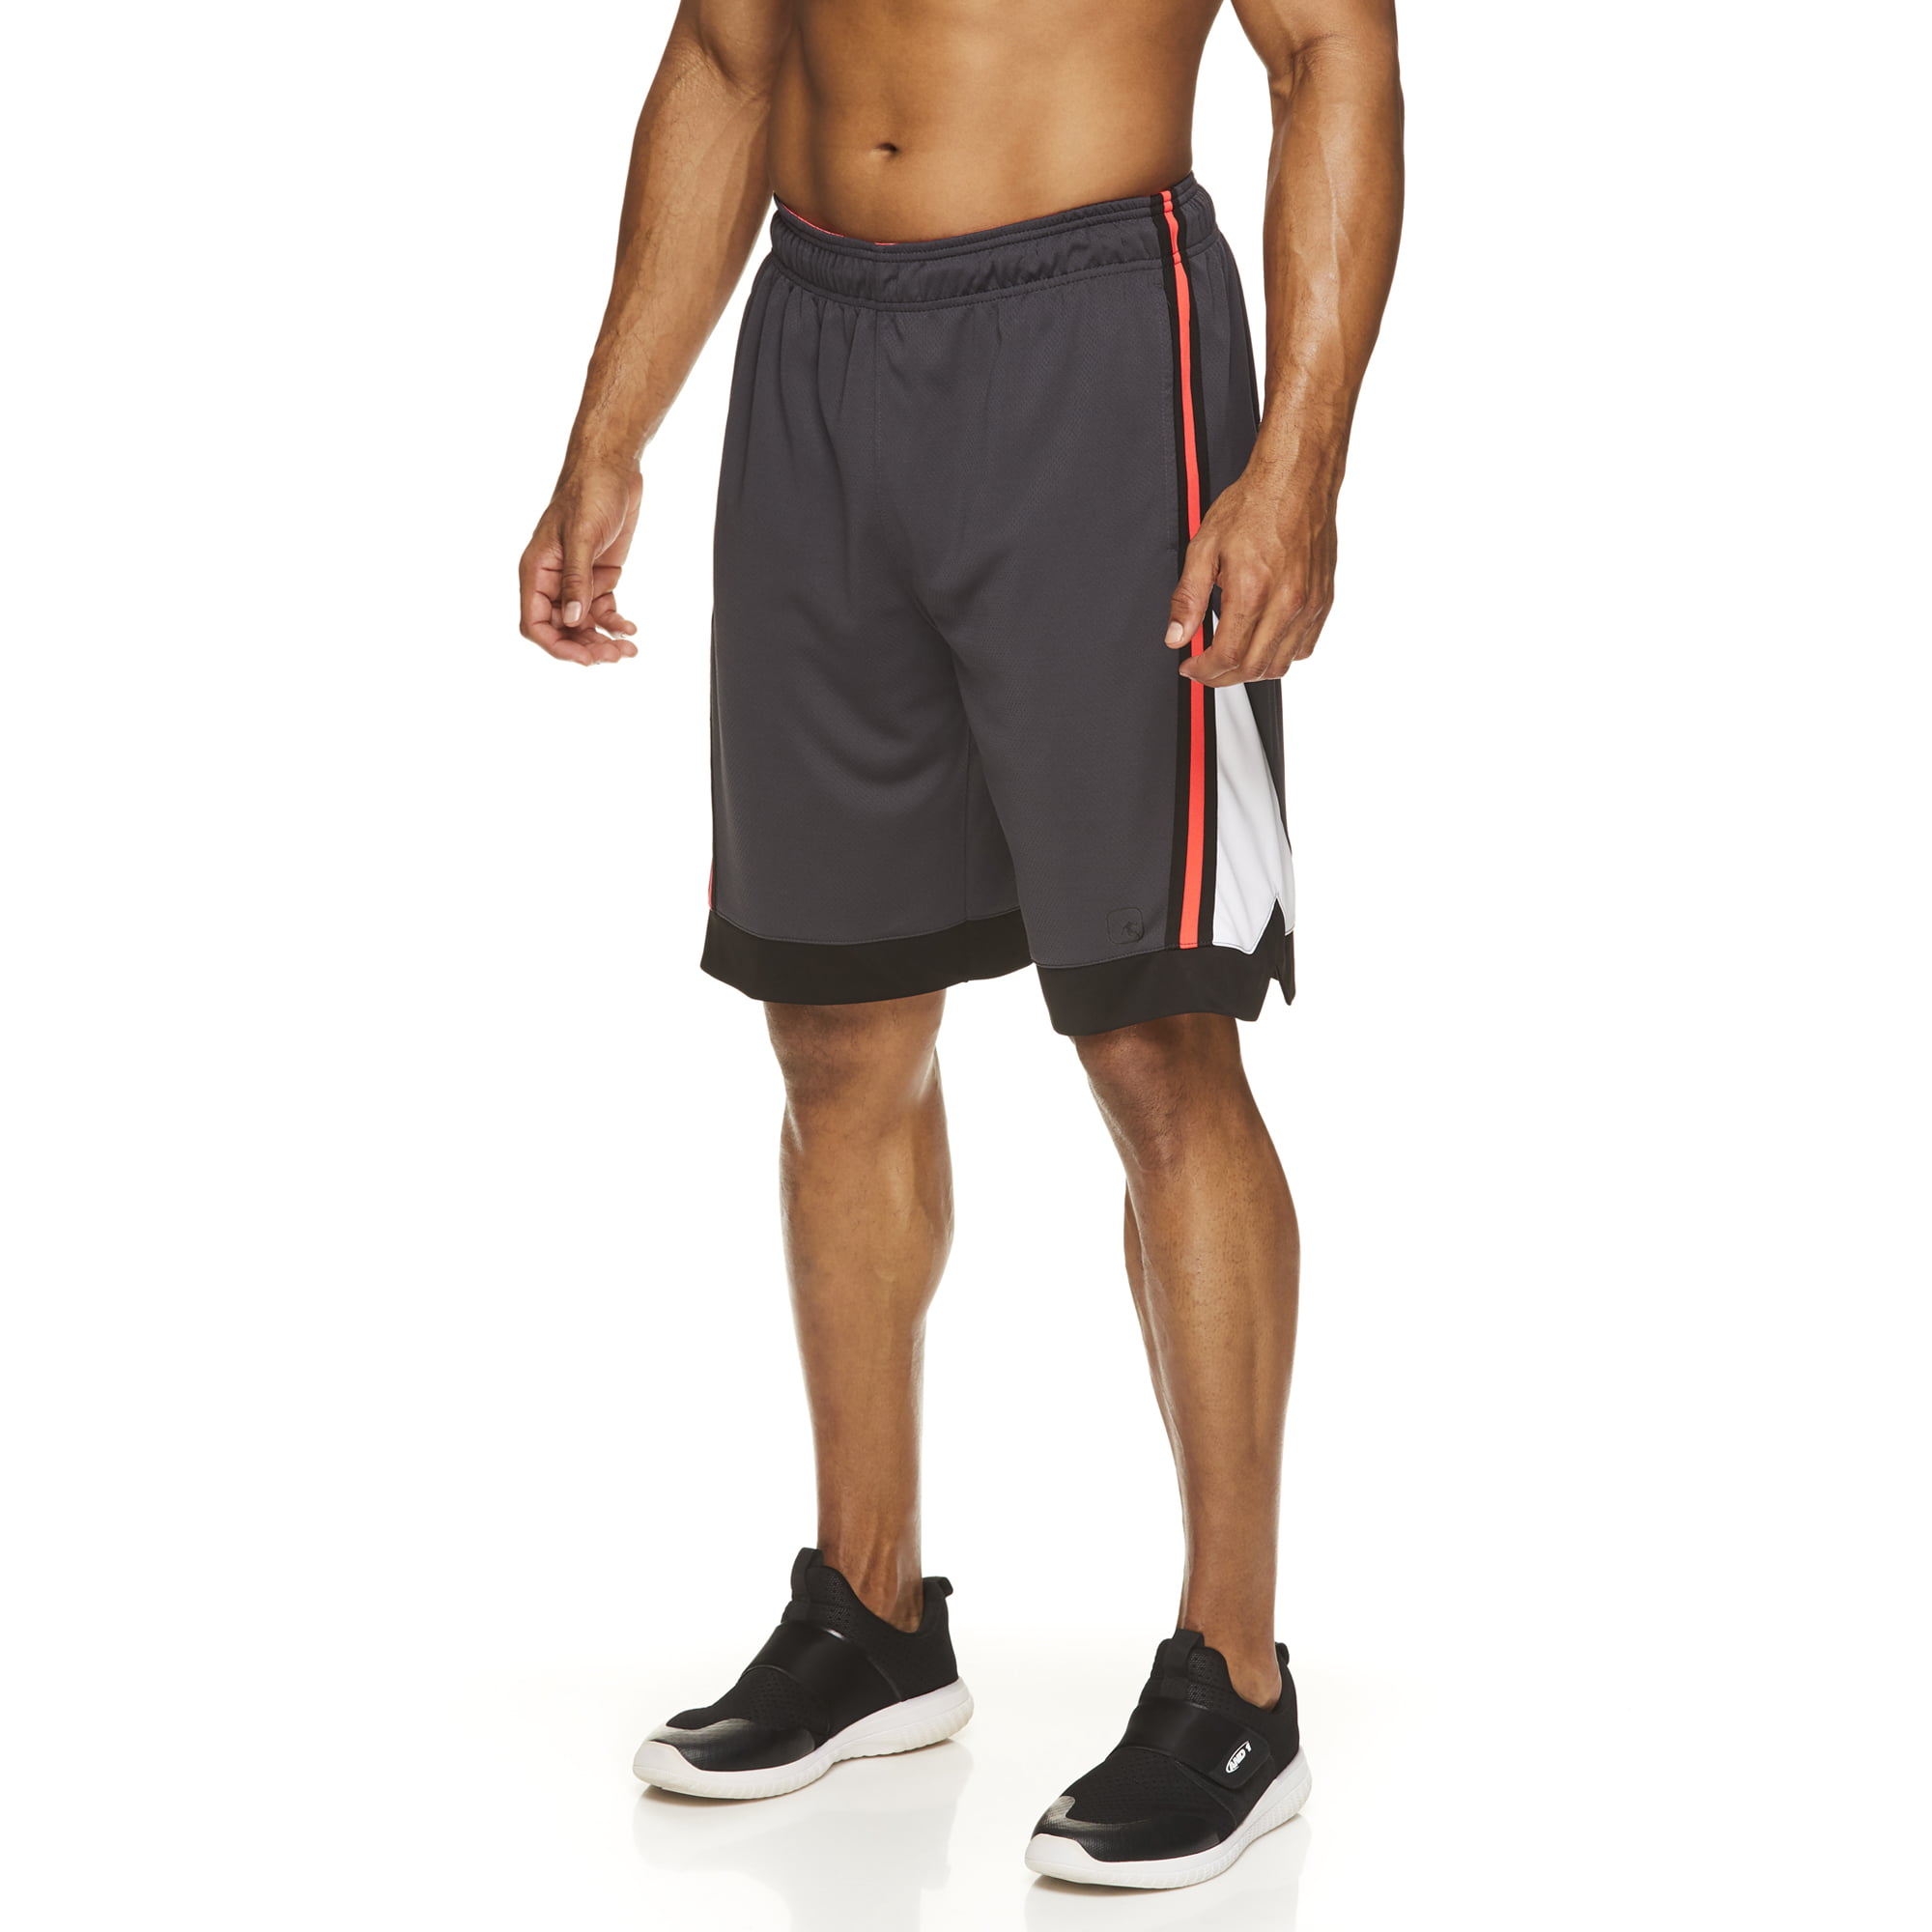 AND1 Men's Active Side Stripe Basketball Shorts, up to 5XL